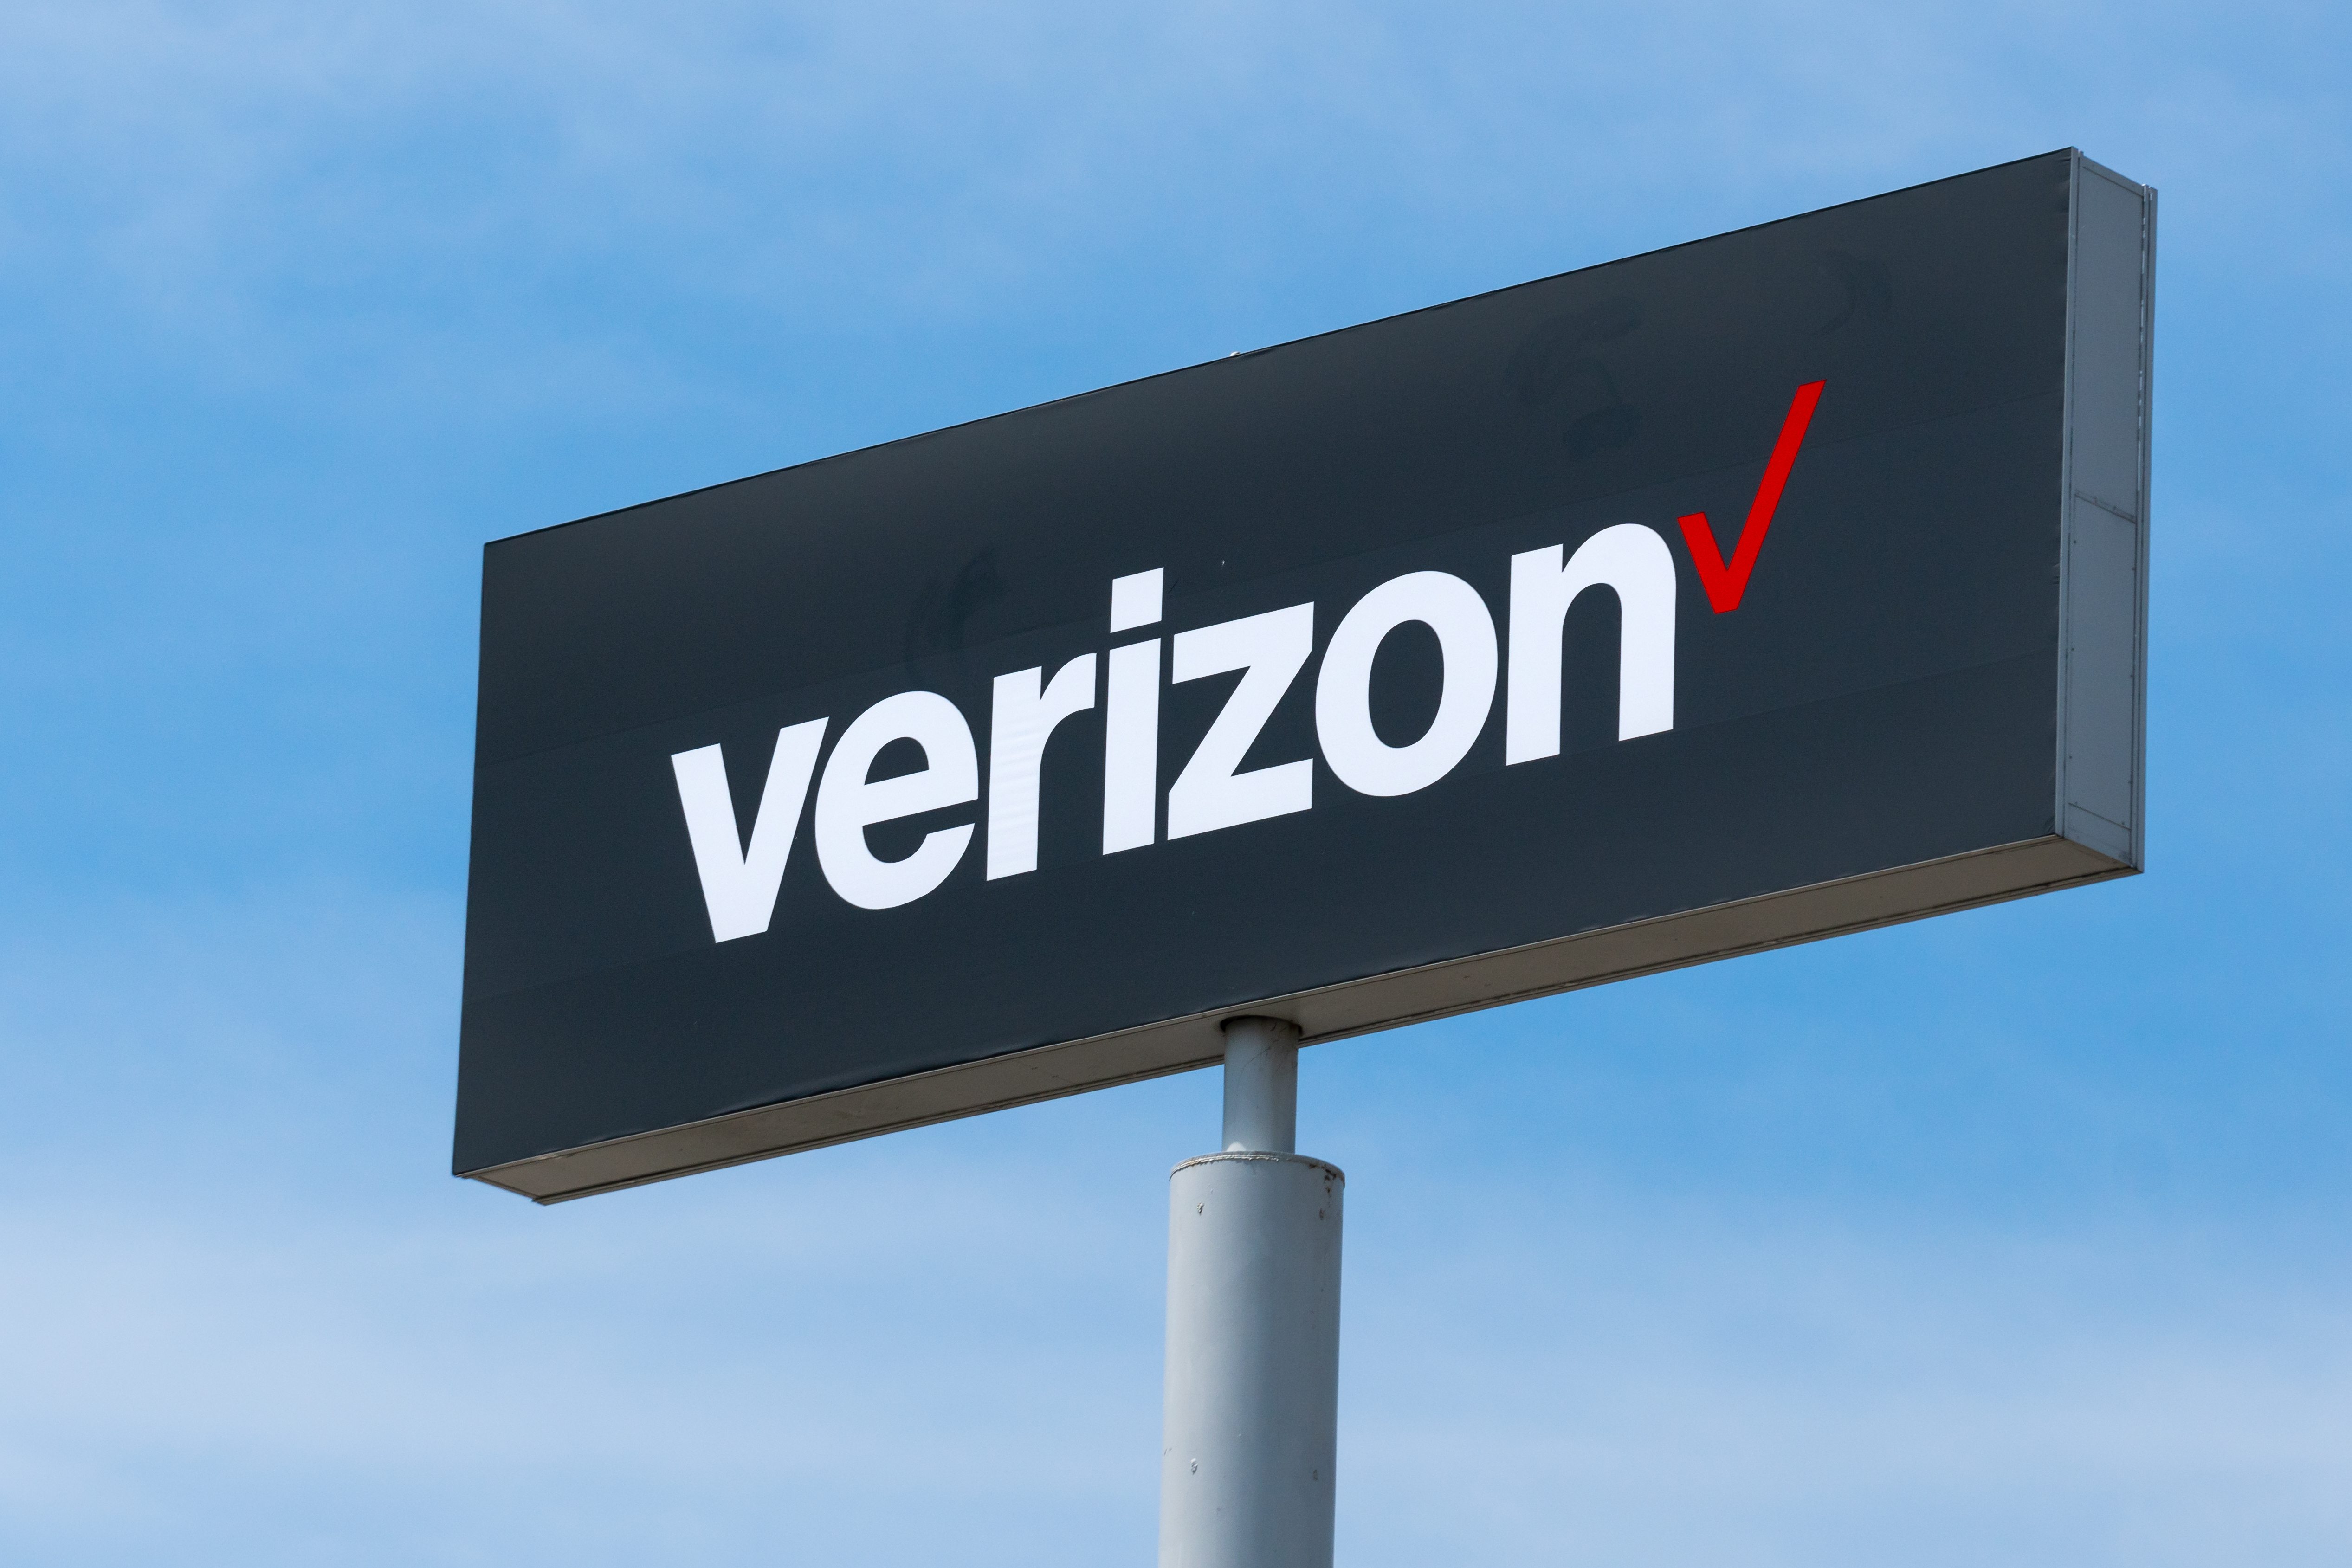 New Verizon 5G Home Internet Customers Can Get a Free Nintendo Switch & a $200 Target Gift Card or Samsung Chromebook Go